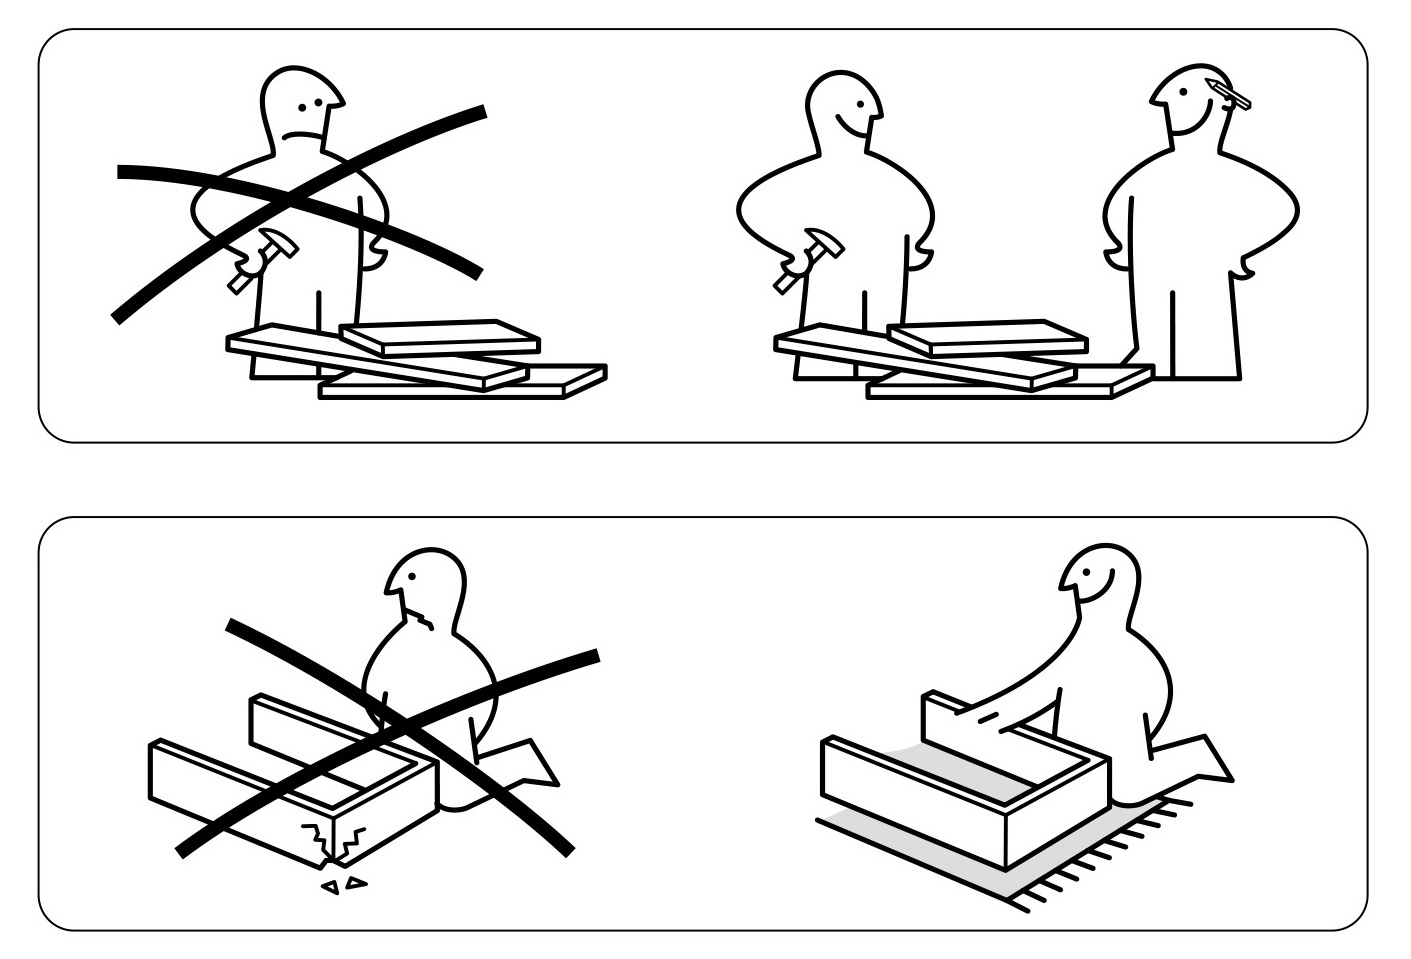 An excerpt of IKEA's assembly instructions